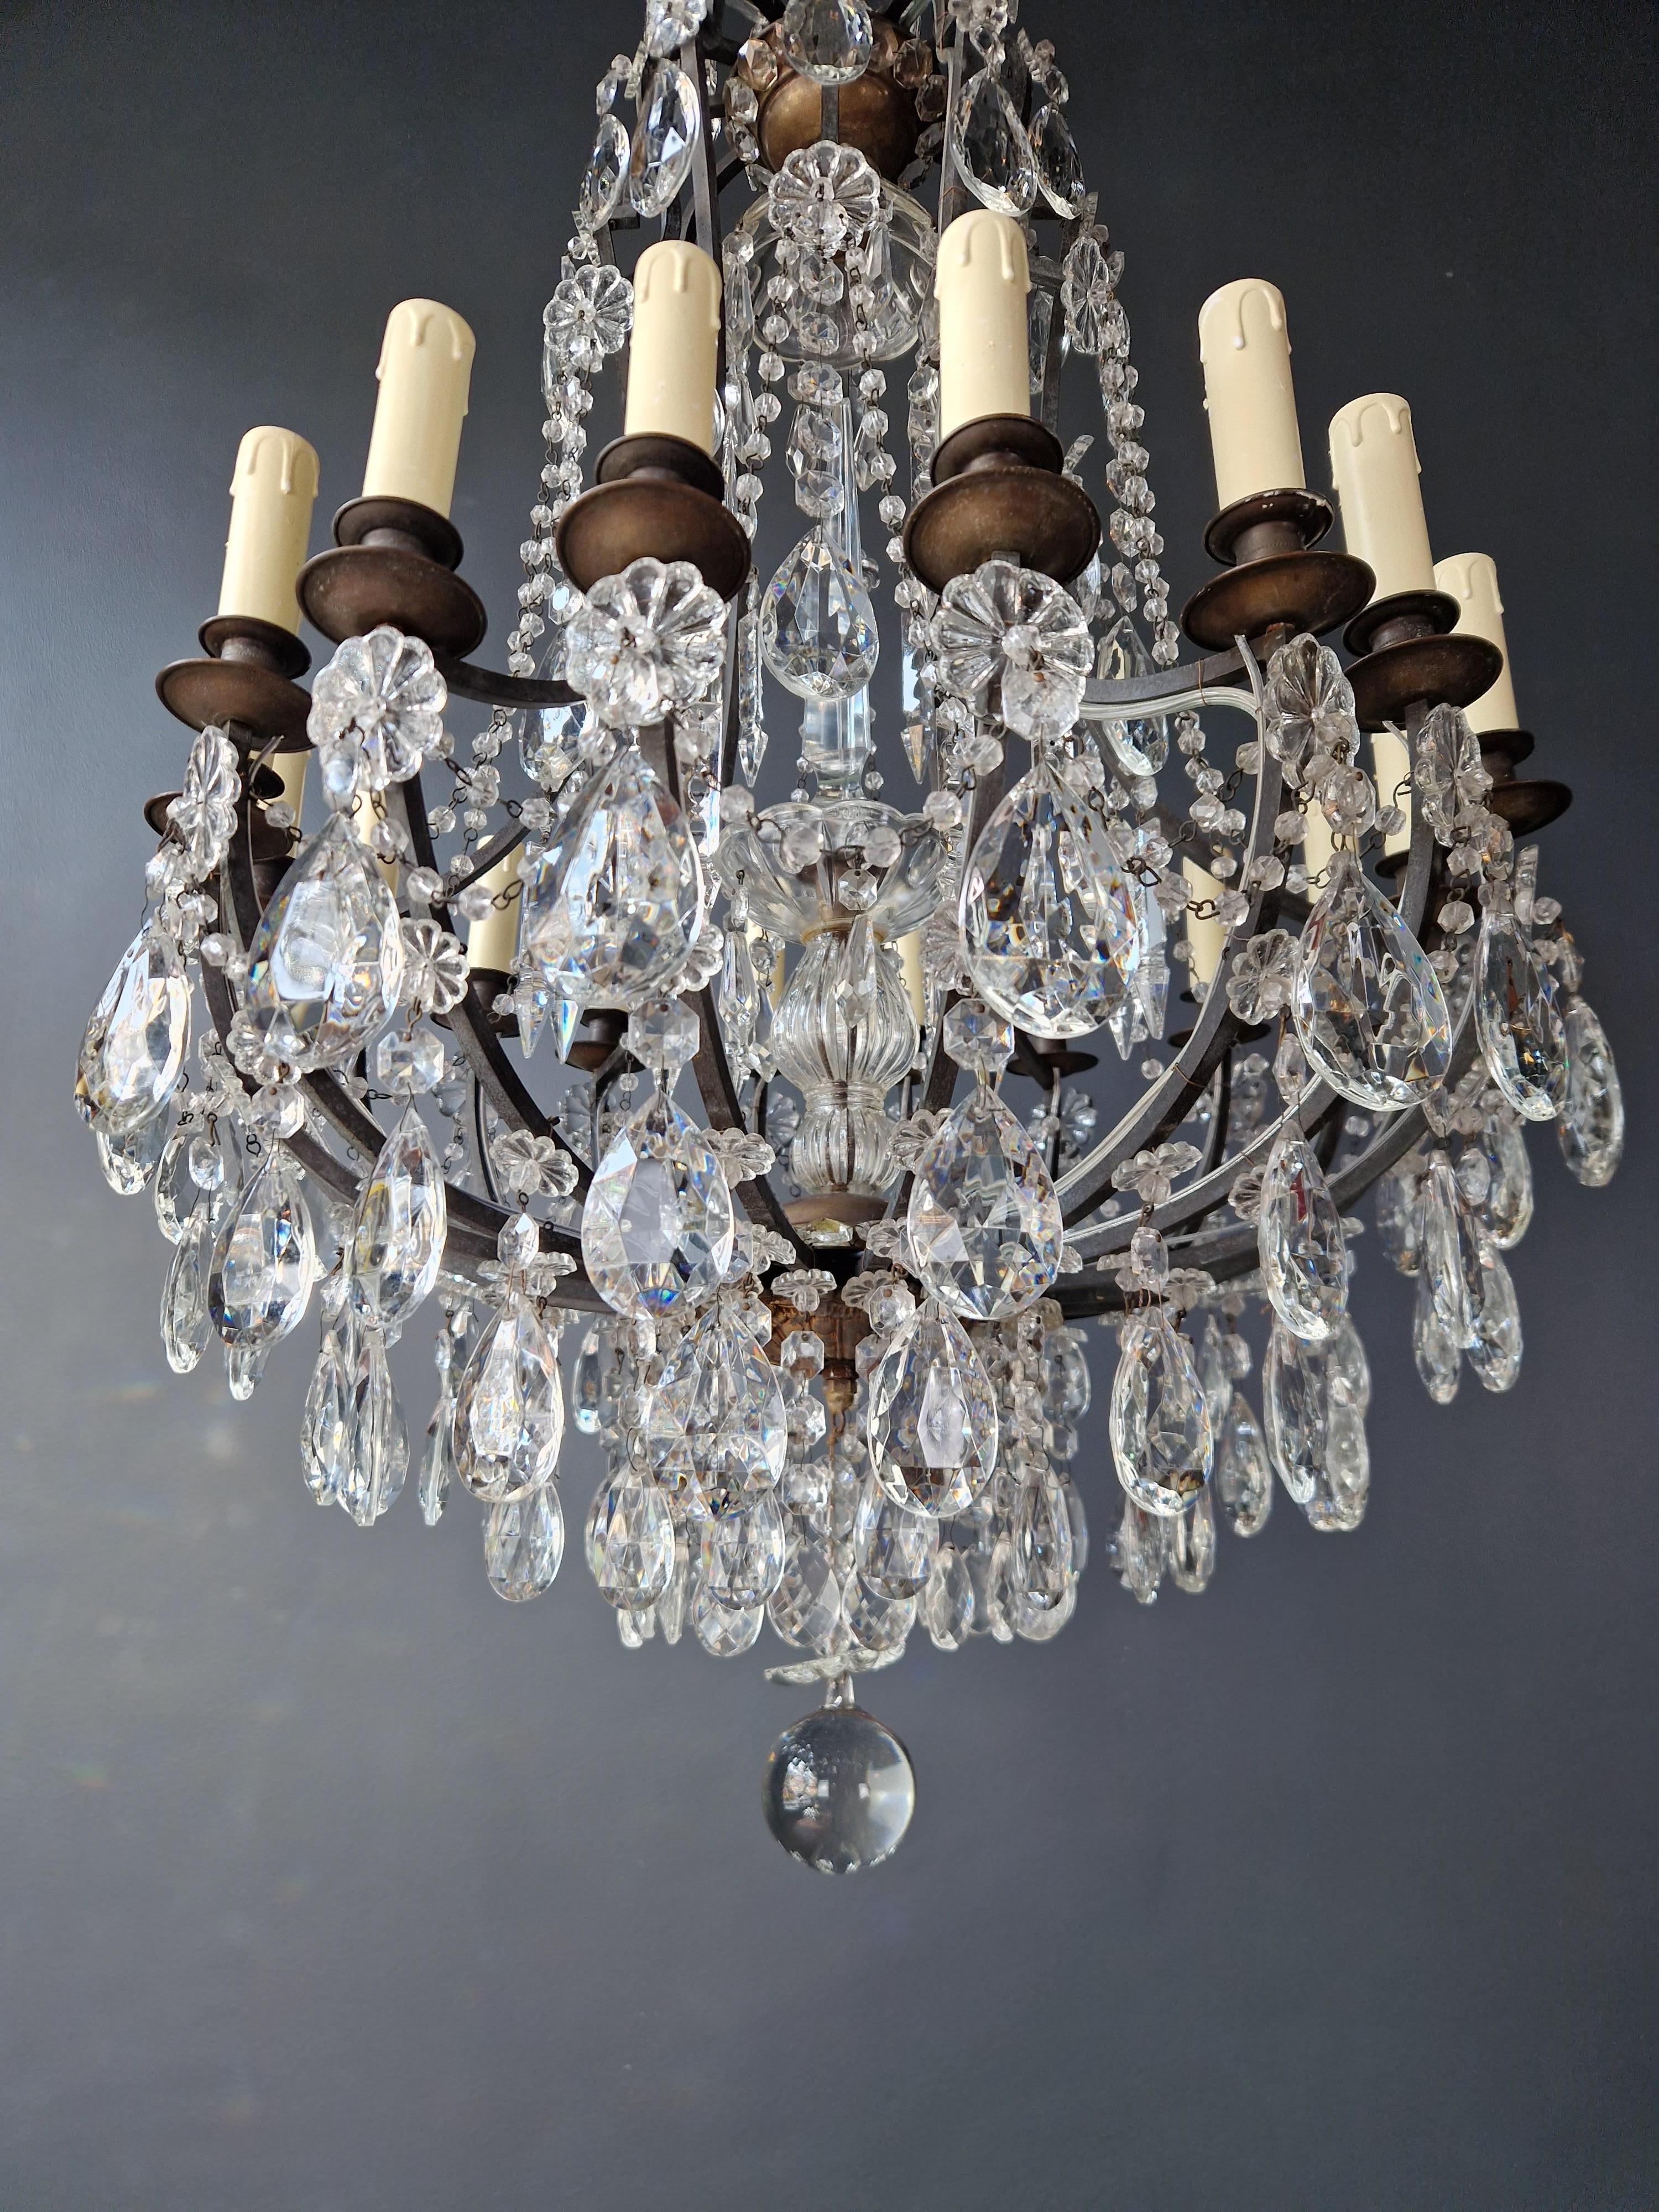 Early 20th Century Antique French Crystal Chandelier Ceiling Lamp Lustre Art Nouveau Lamp For Sale